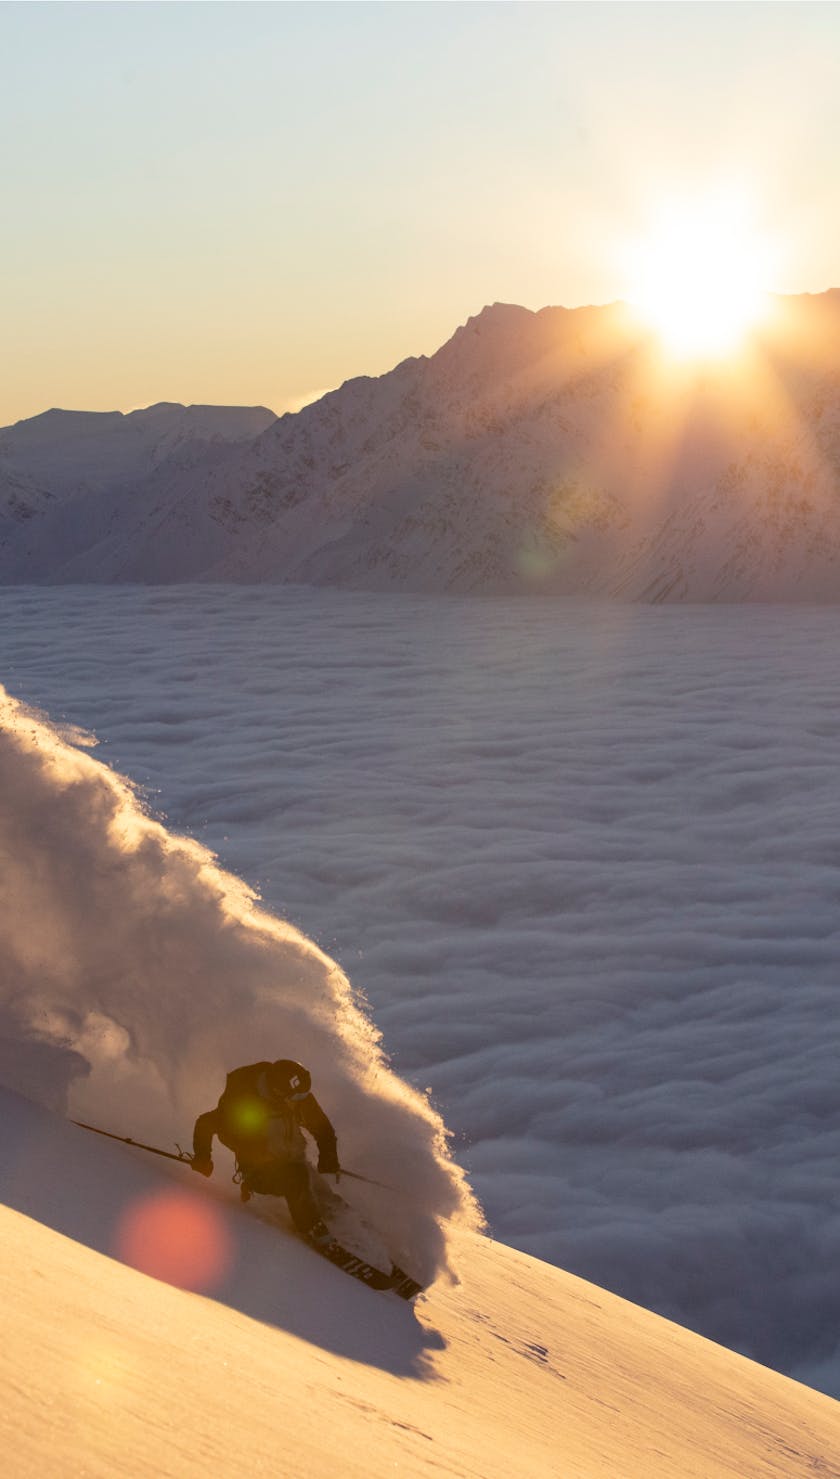 A skier makes their descent while the sun rises off in the distance. 